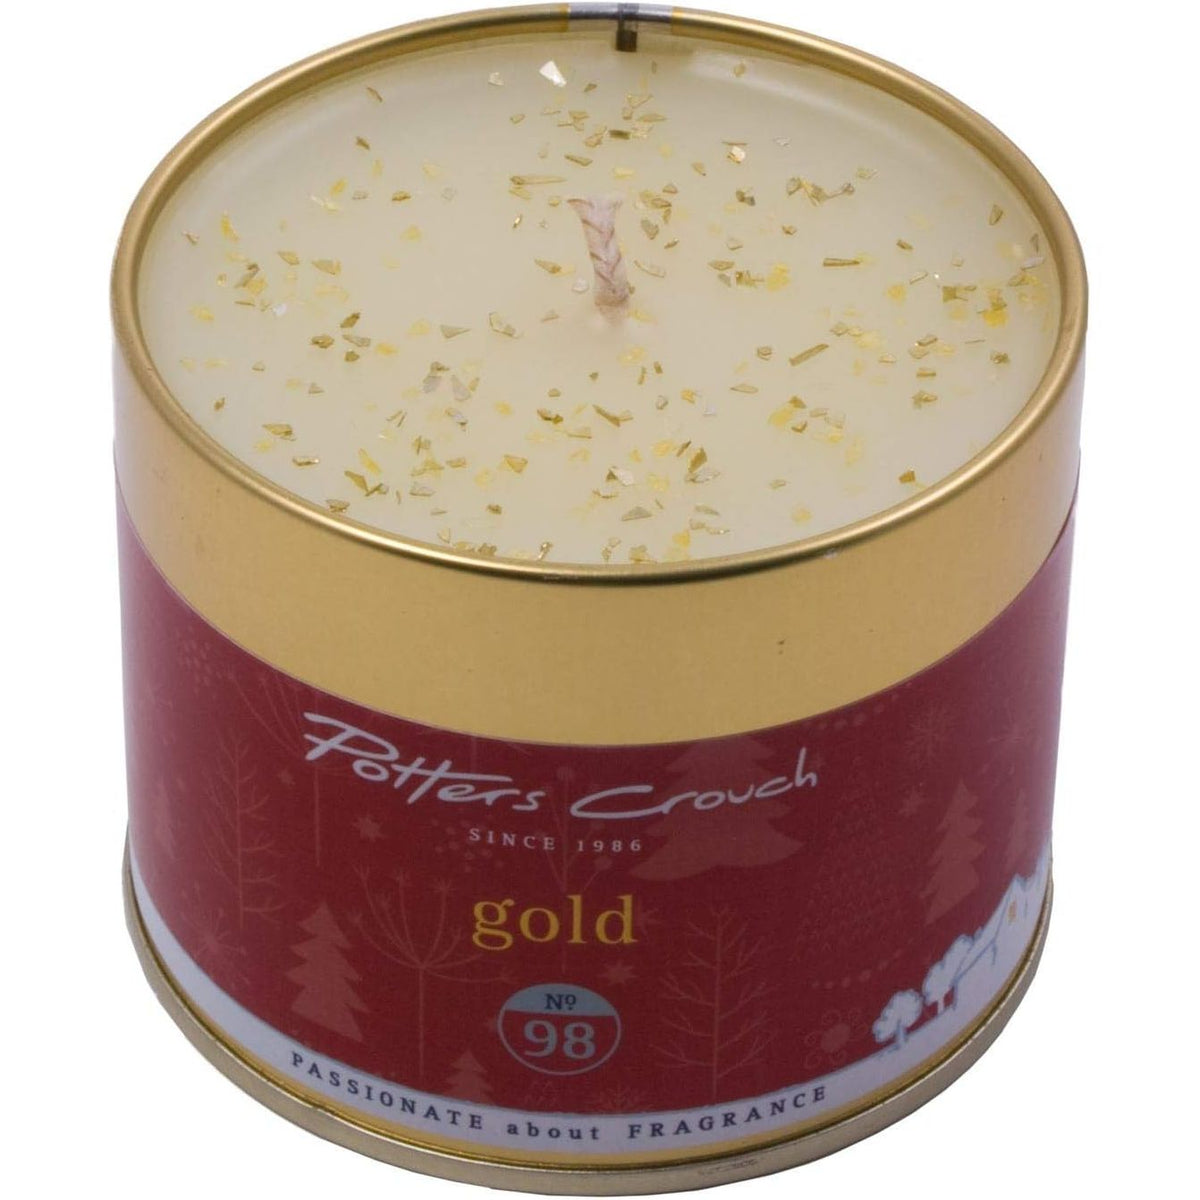 Potters Crouch Gold Scented Candle